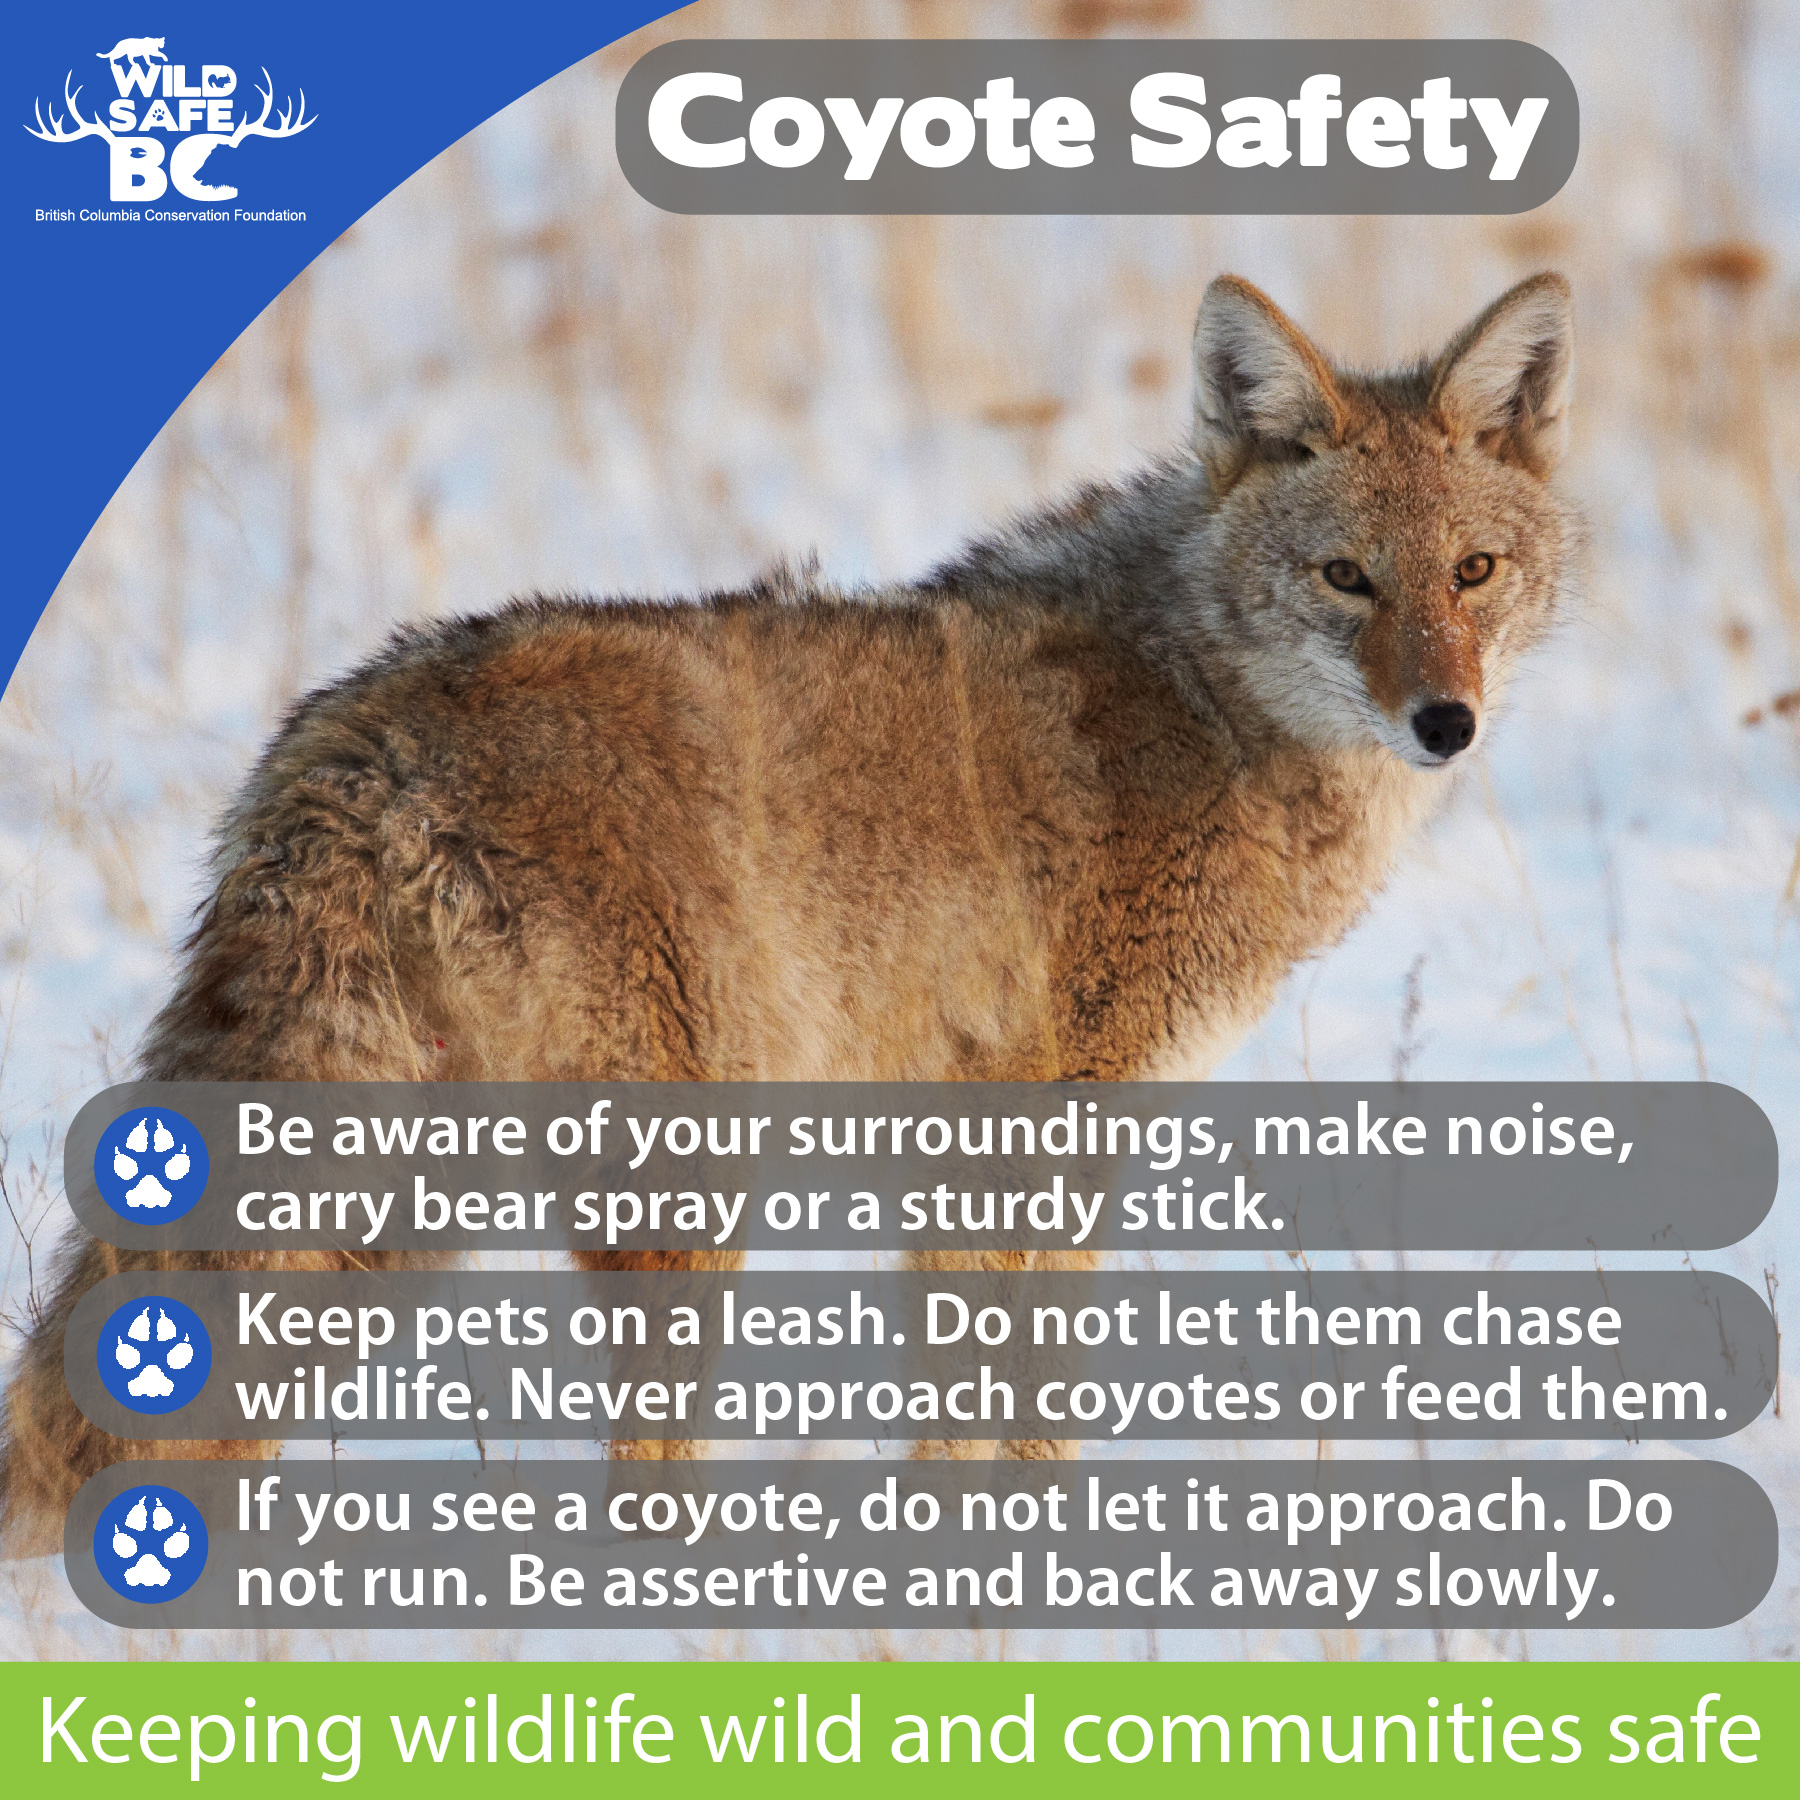 Coyotes — Friend or Foe?, Opinion